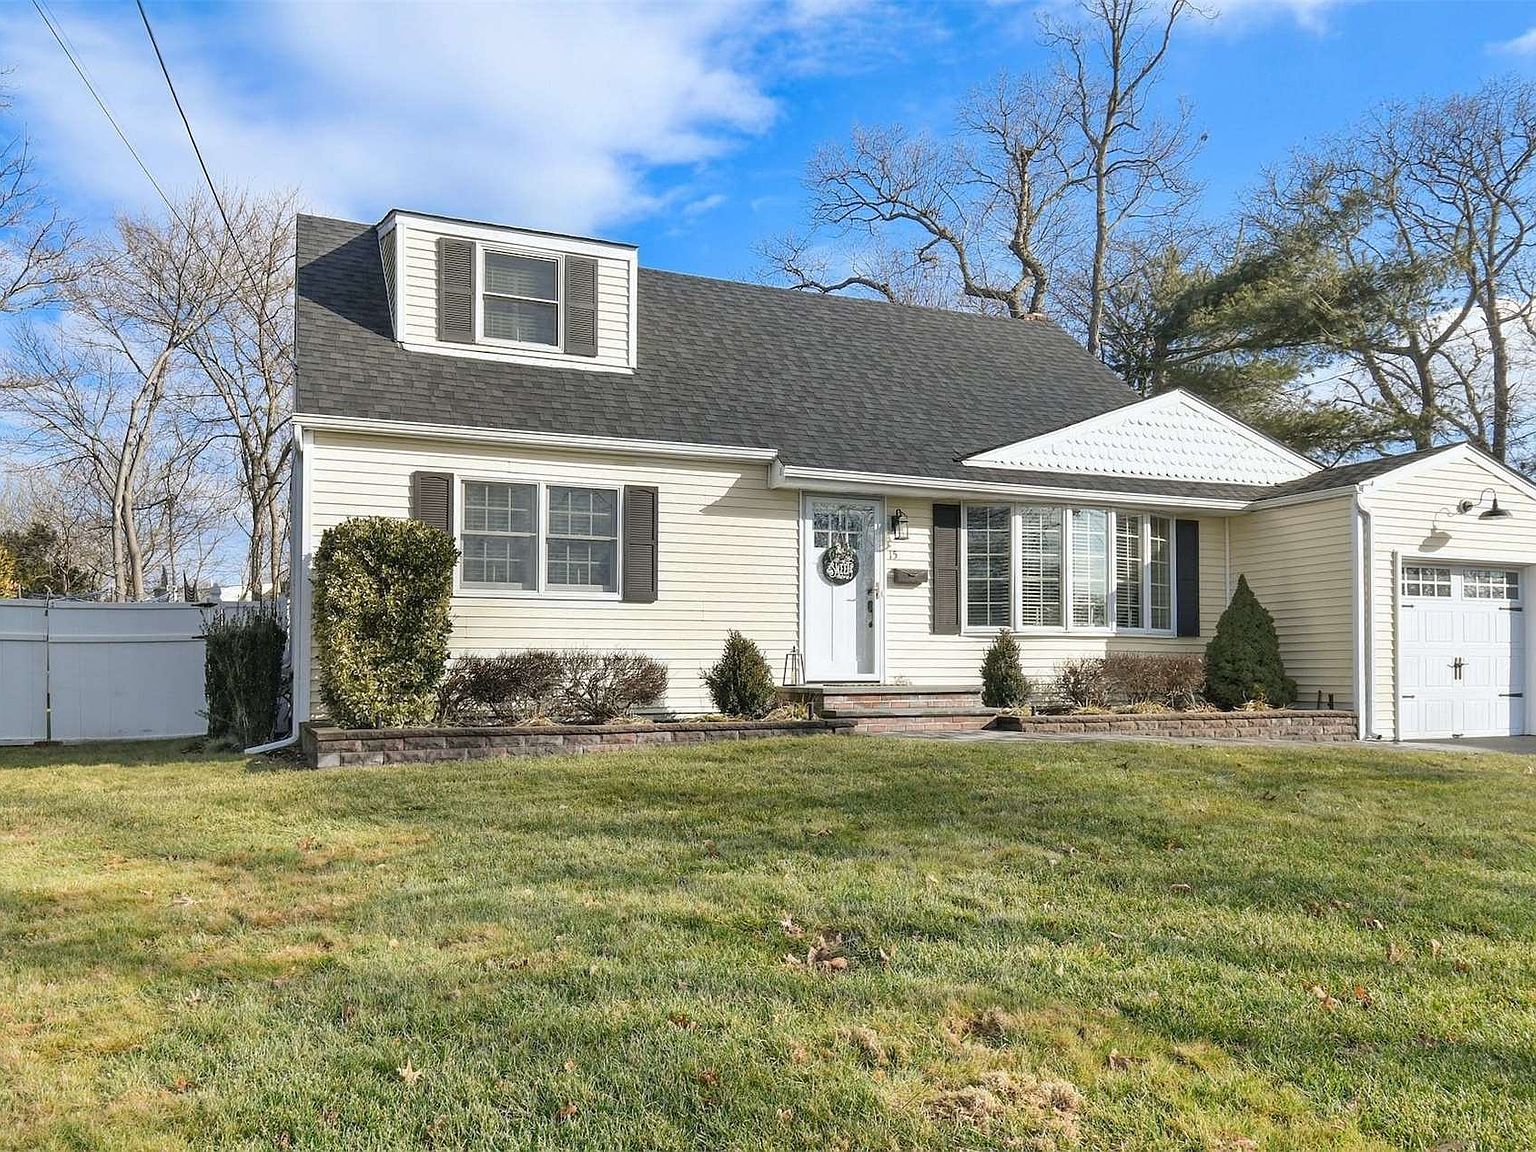 15 Coleridge Place, Greenlawn, NY 11740 | Zillow